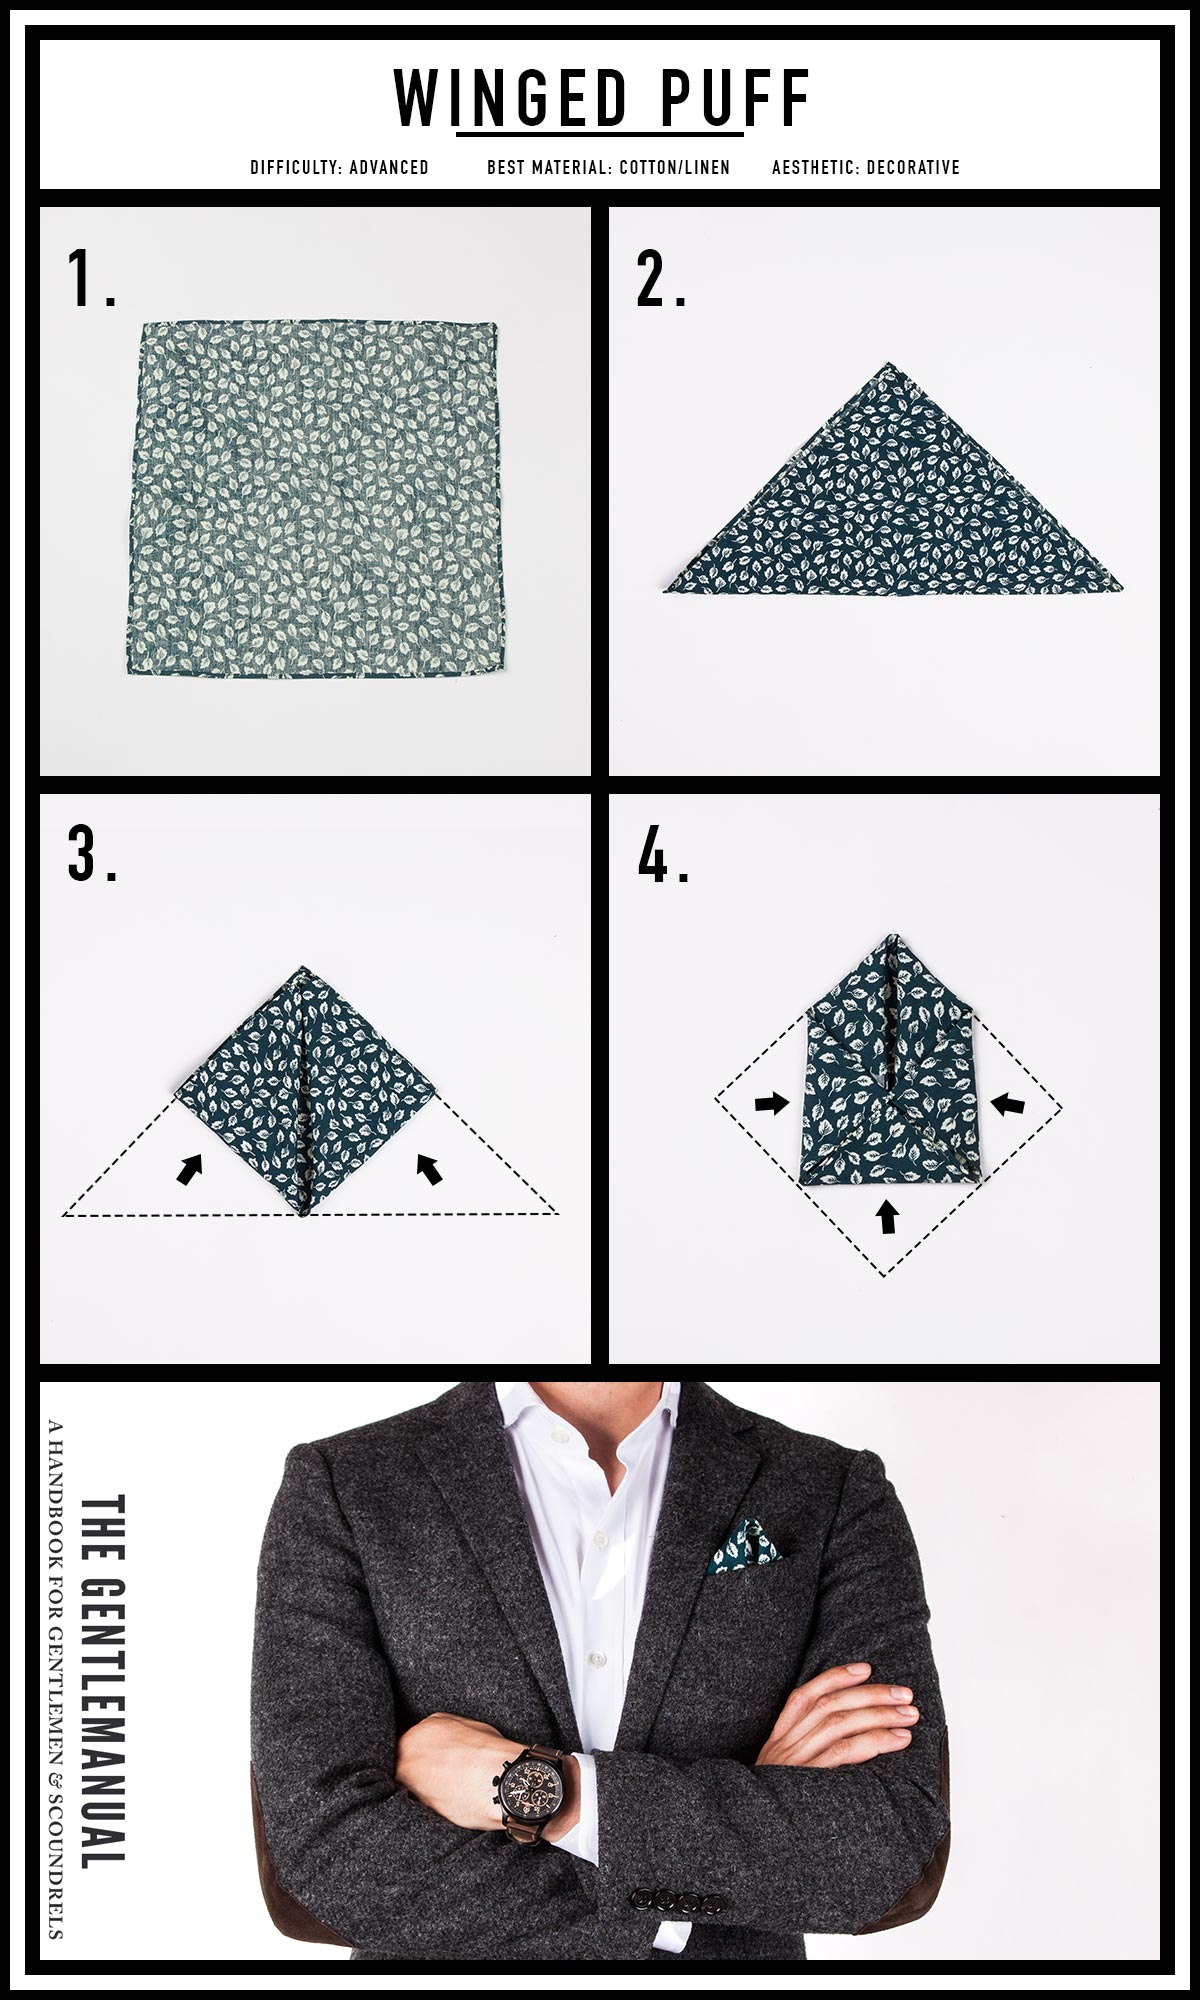 Winged Puff pocket square fold infographic